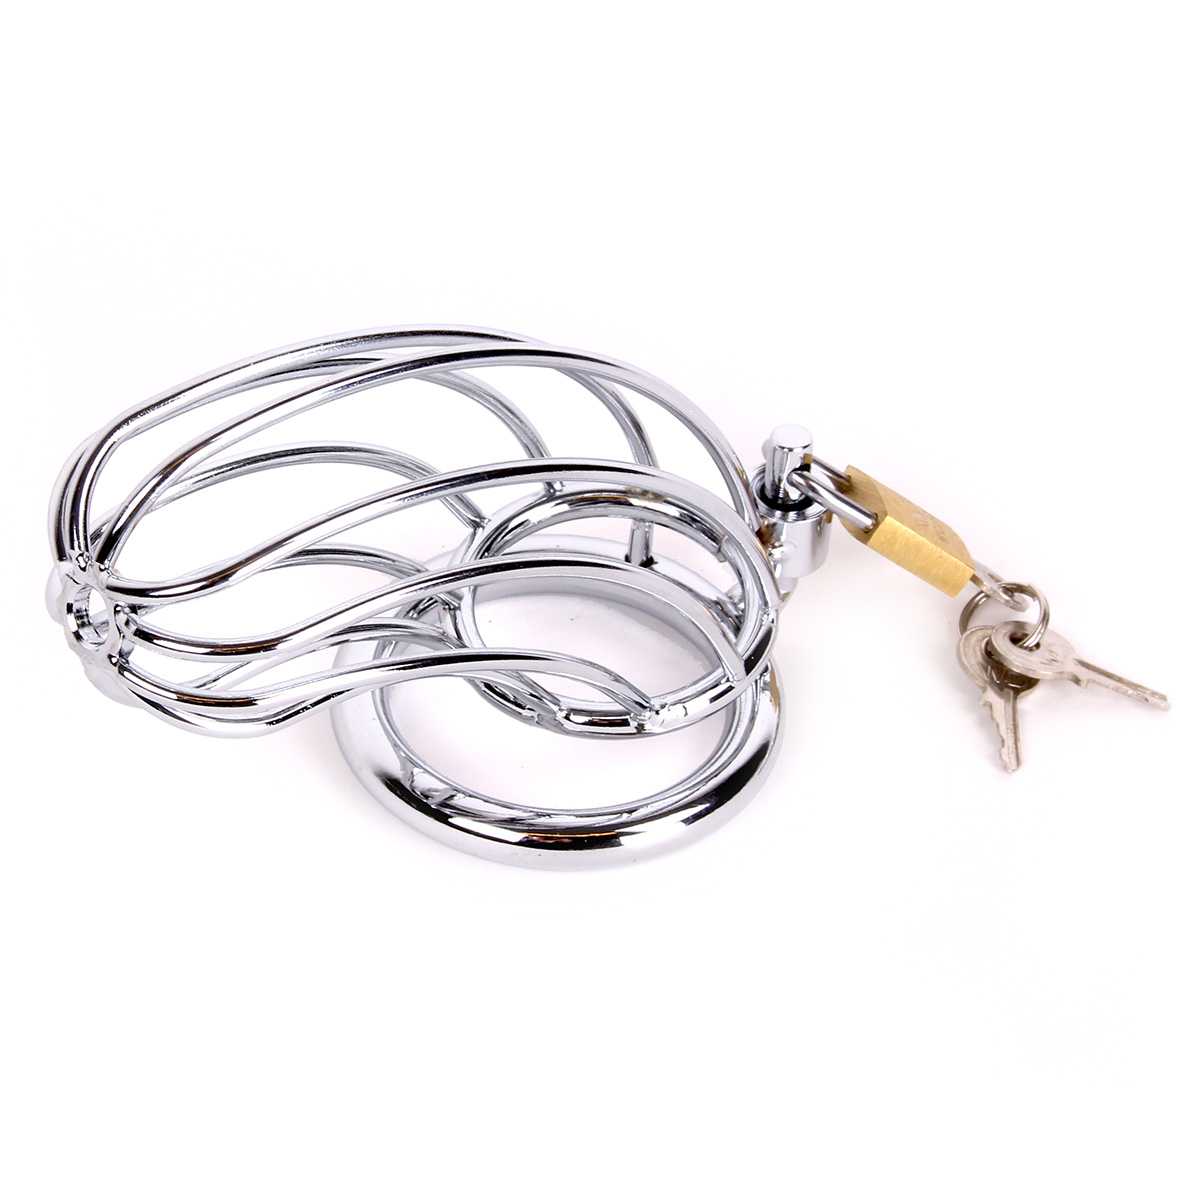 Bird-Cage-Chastity-Cage-146-1070-1